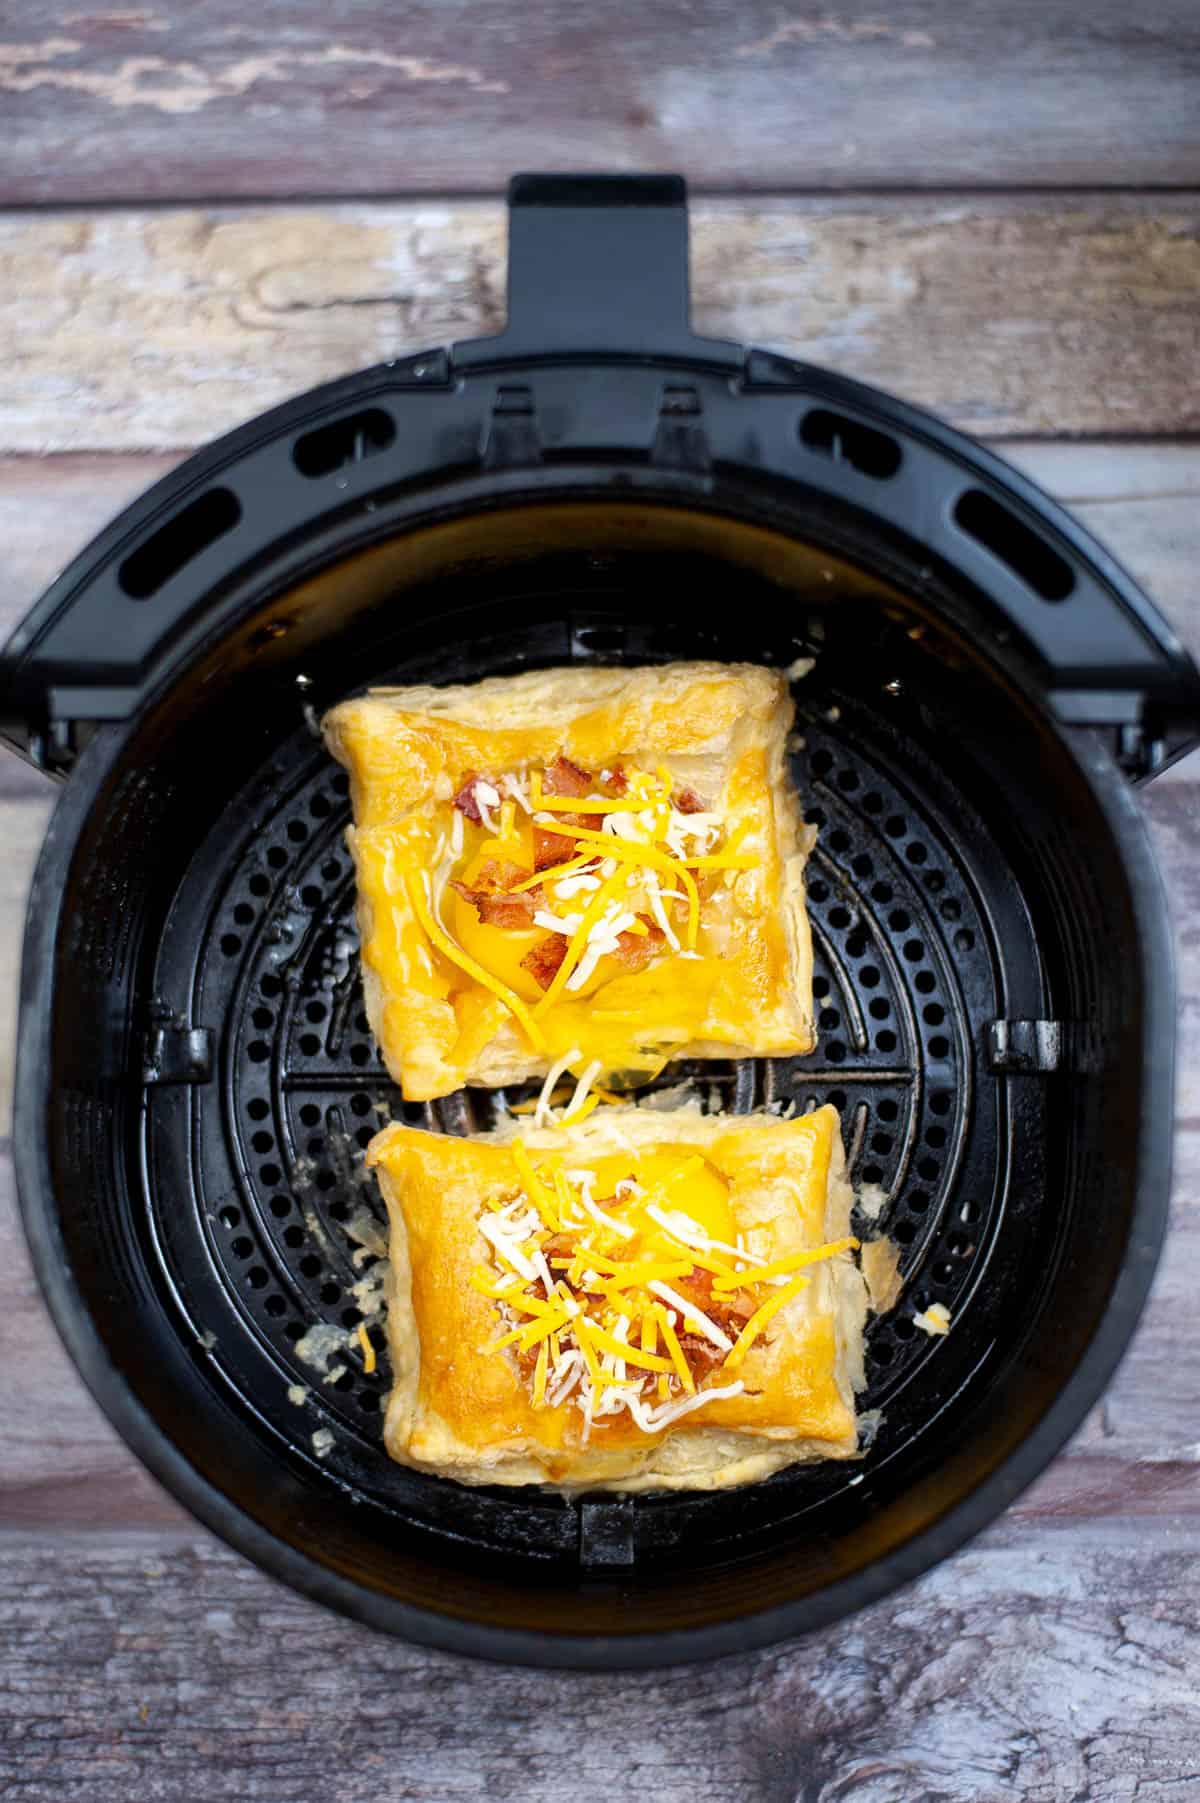 eggs, bacon, and cheese on top of the puff pastry squares in the air fryer basket.